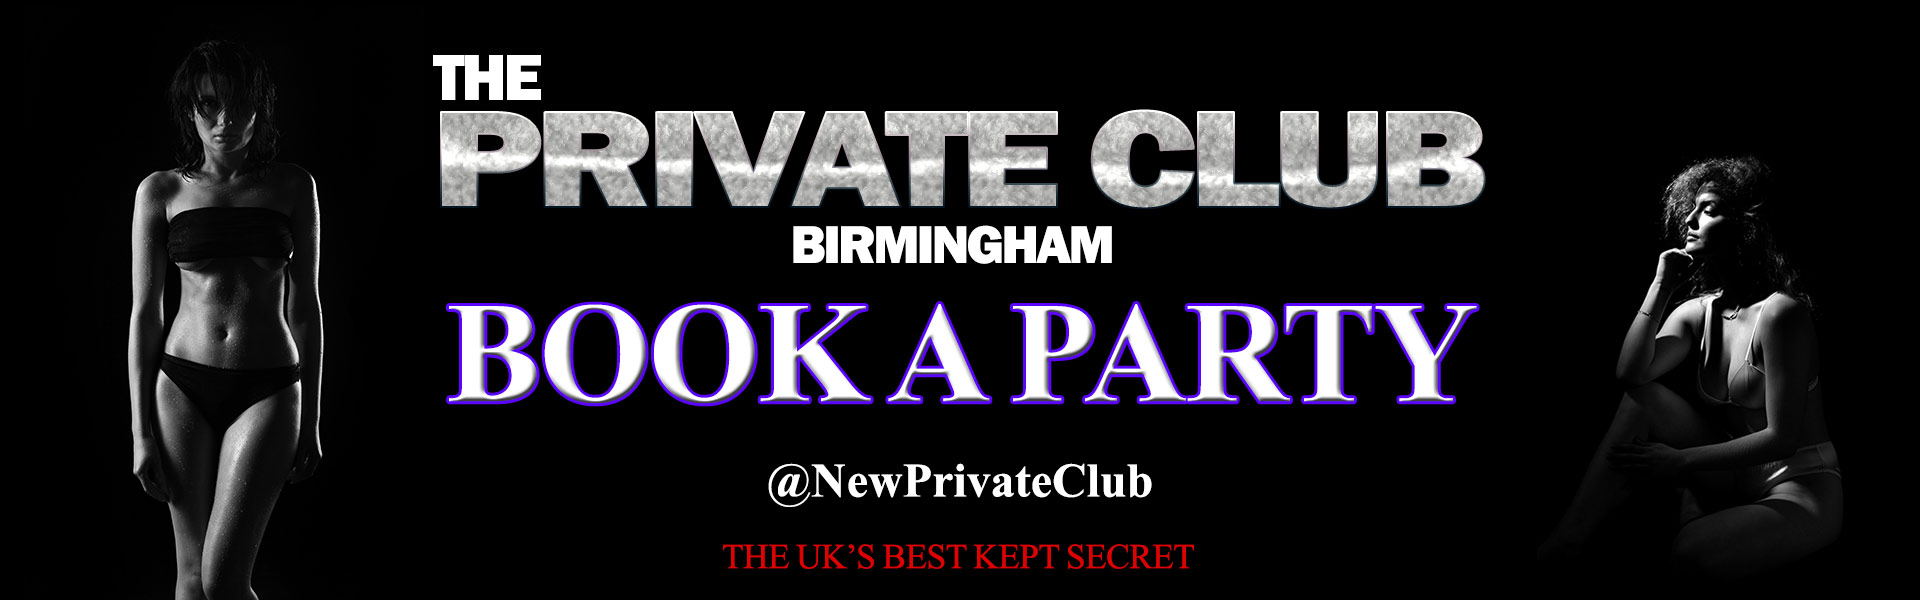 book-a-party-at-the-private-club